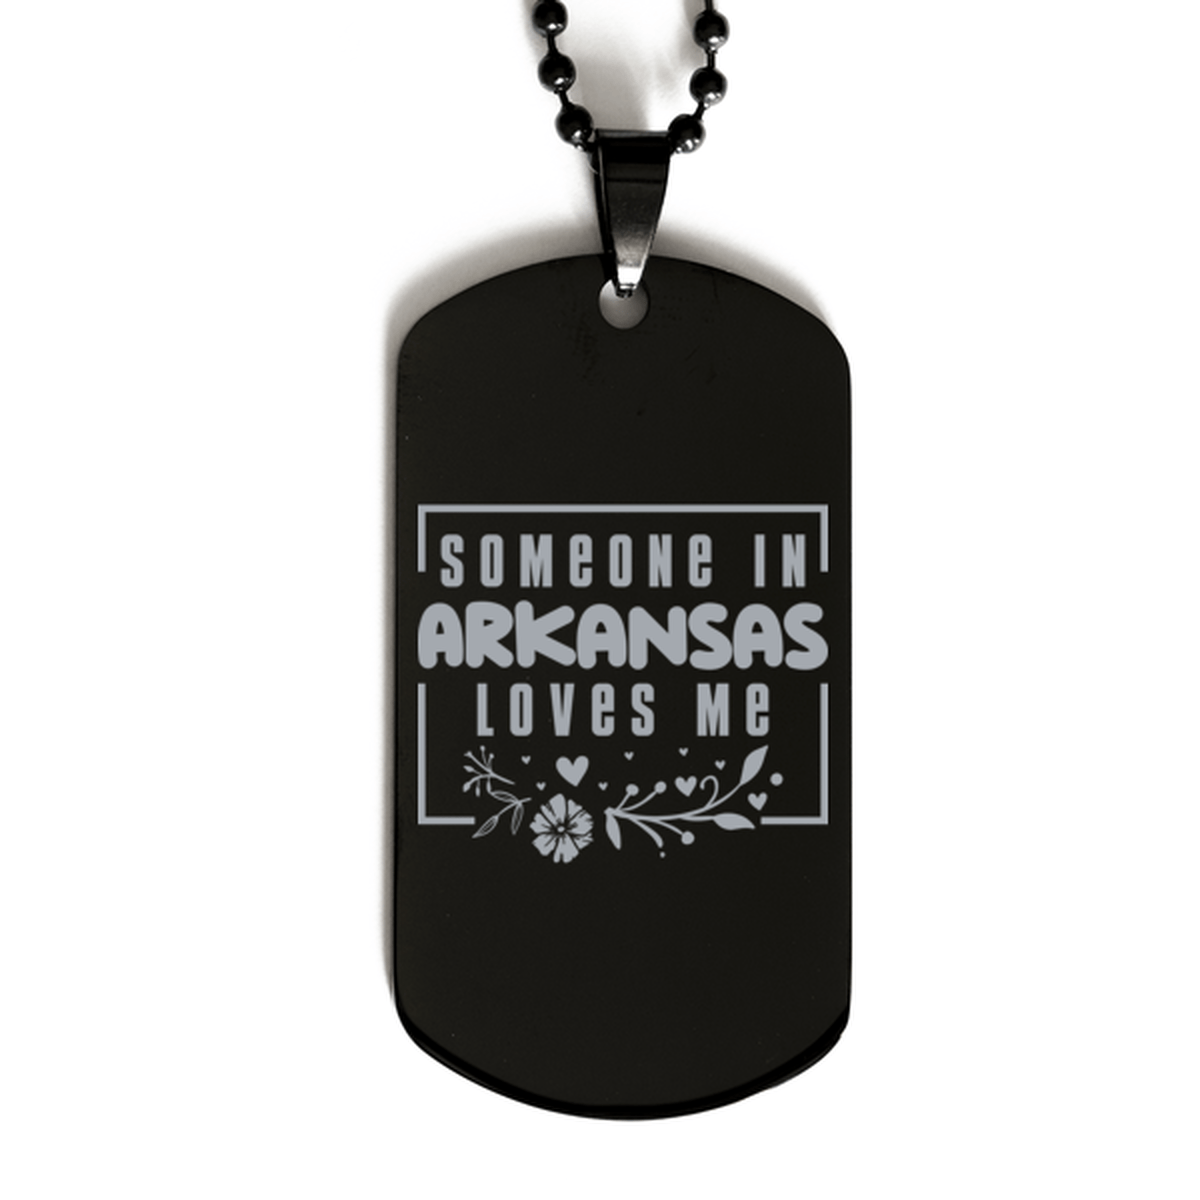 Cute Arkansas Black Dog Tag Necklace, Someone in Arkansas Loves Me, Best Birthday Gifts from Arkansas Friends & Family